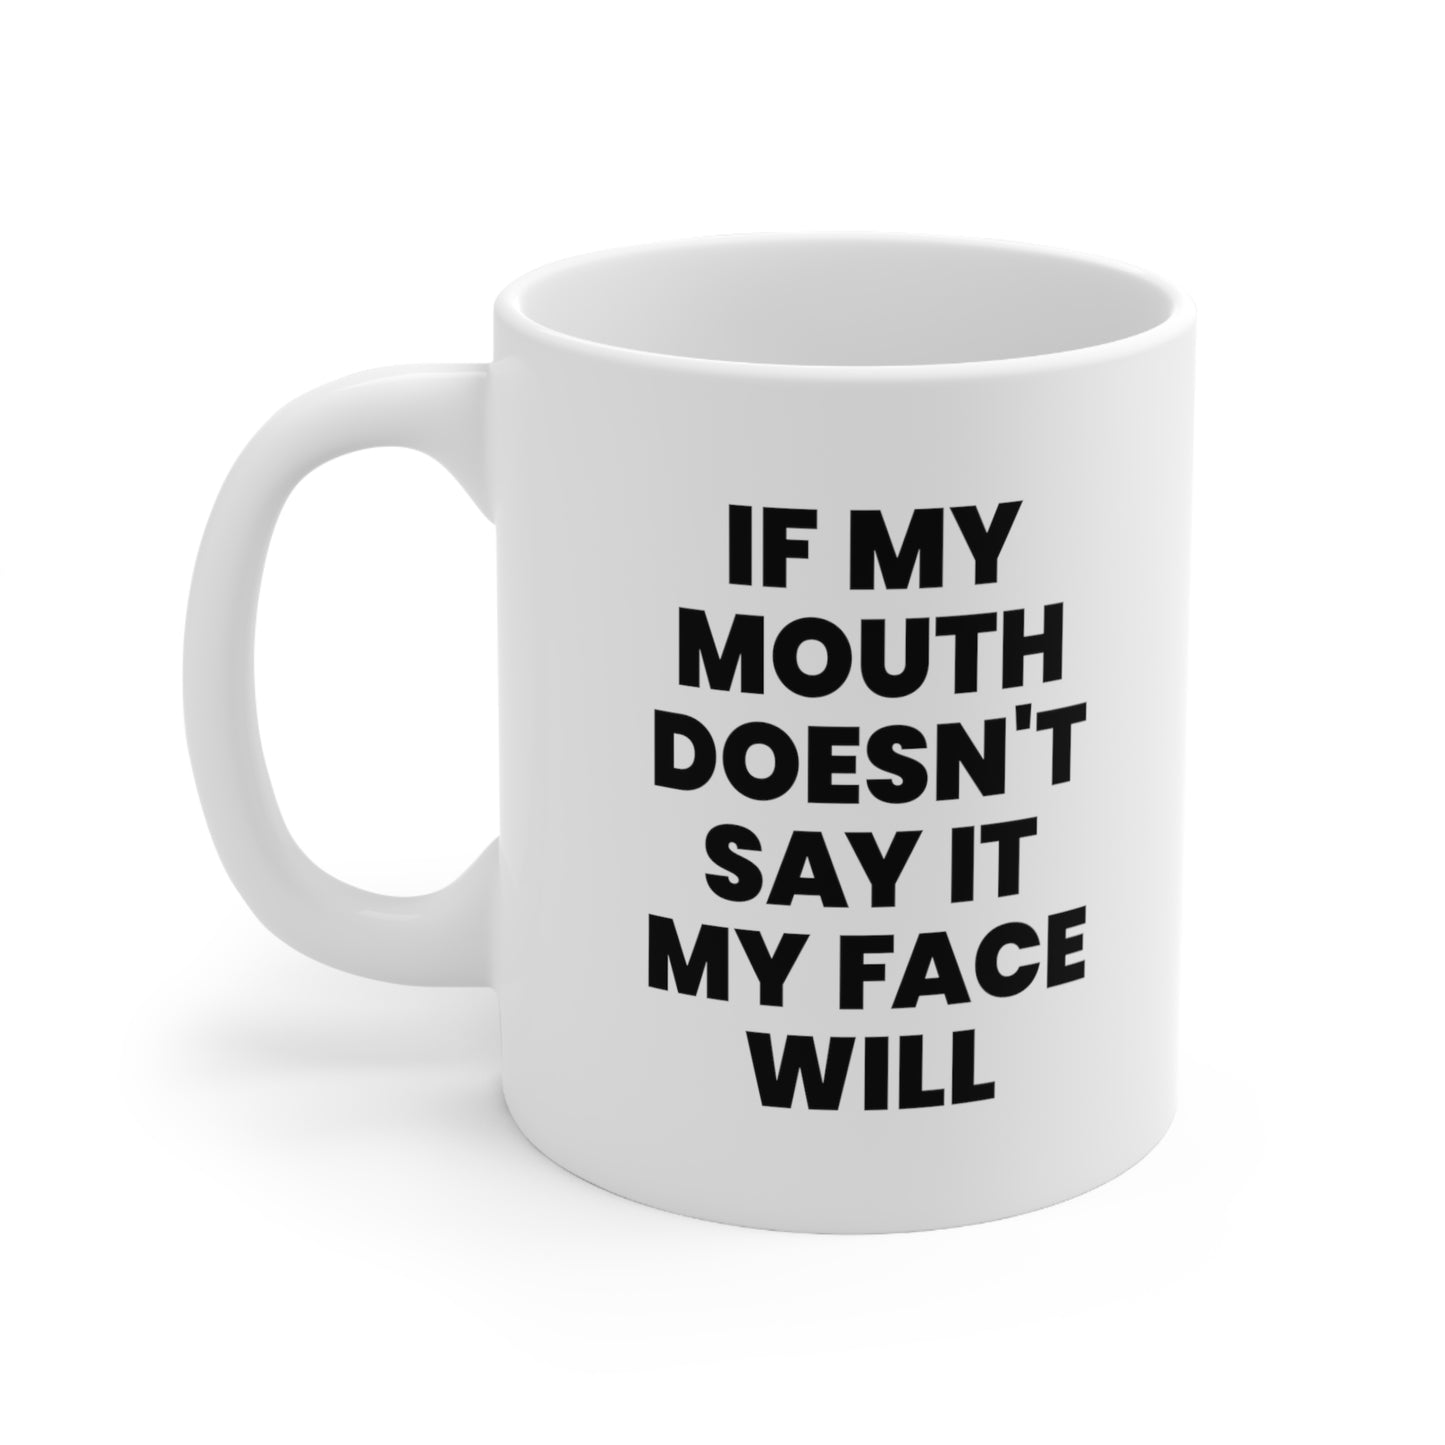 If my mouth doesn't say it my face will Coffee Mug